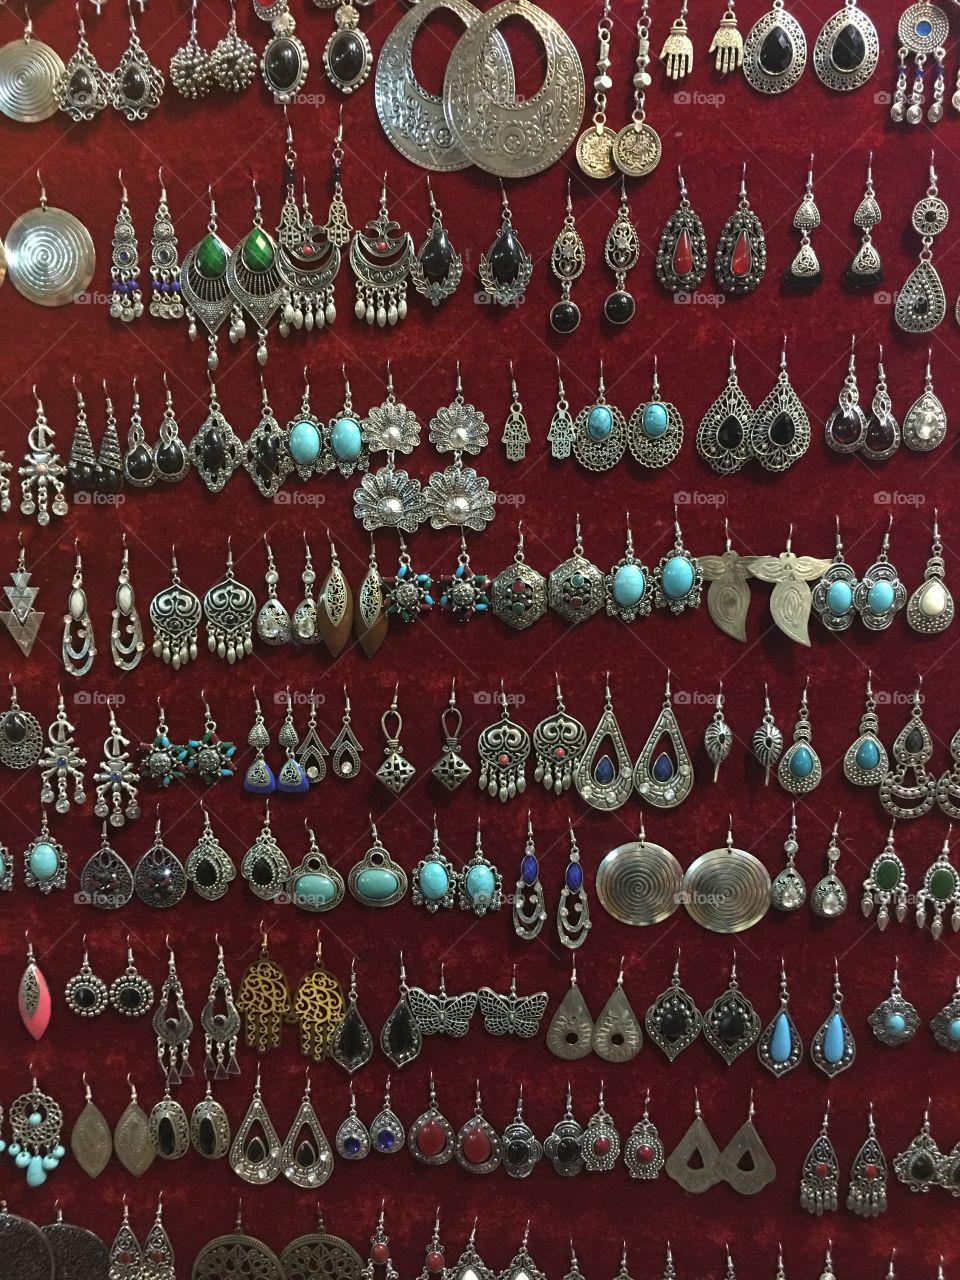 Morocco 🇲🇦: Traditional Jewelry 